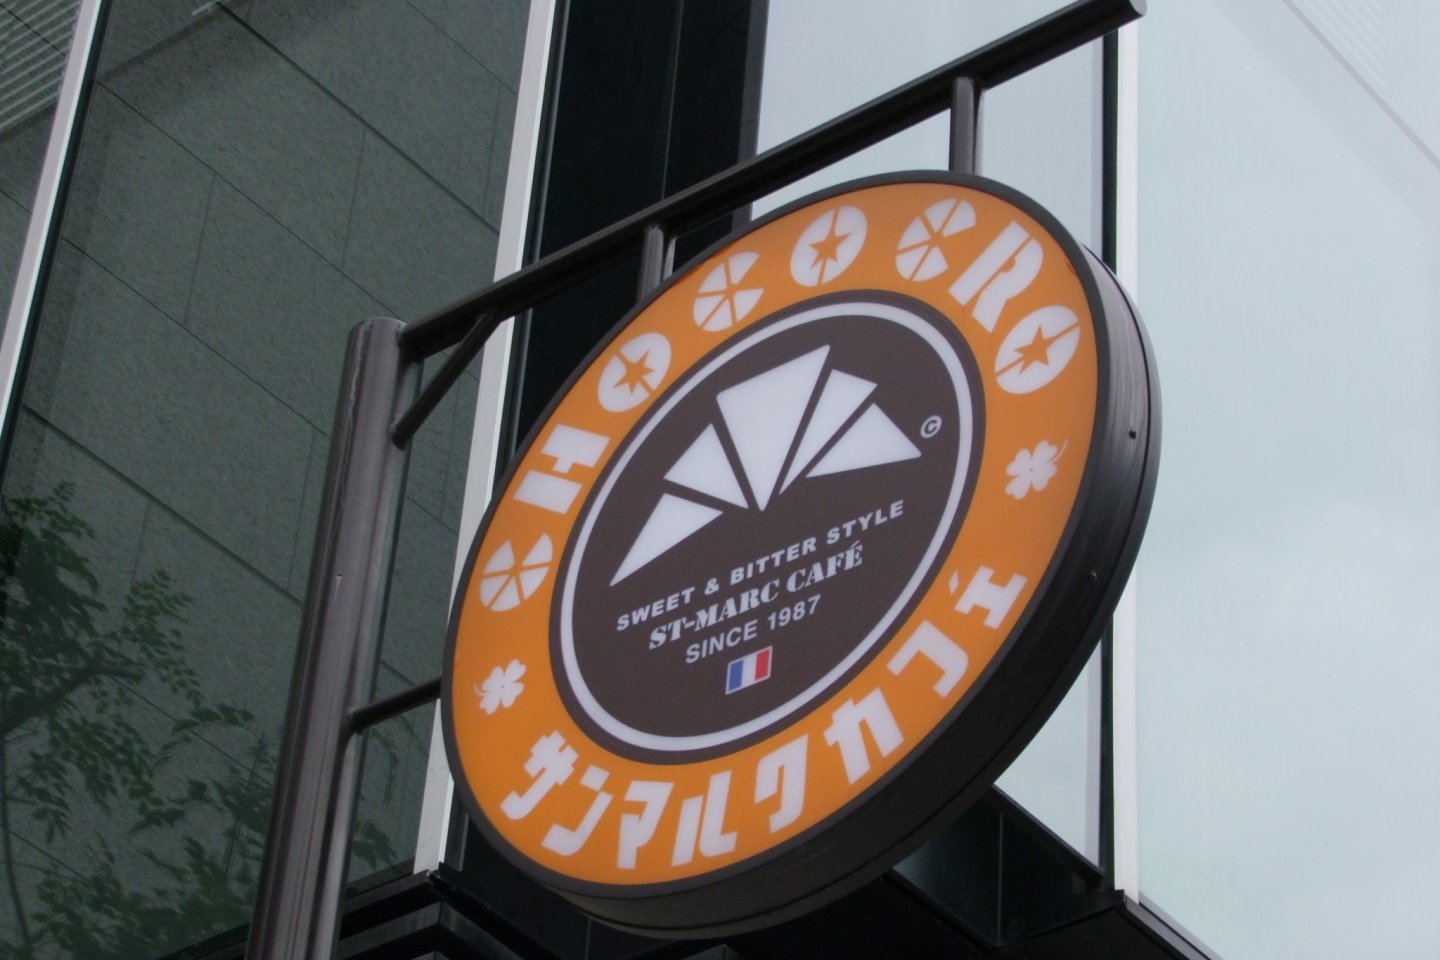 The signature ChocoCro is as recognizable as the shop's name itself